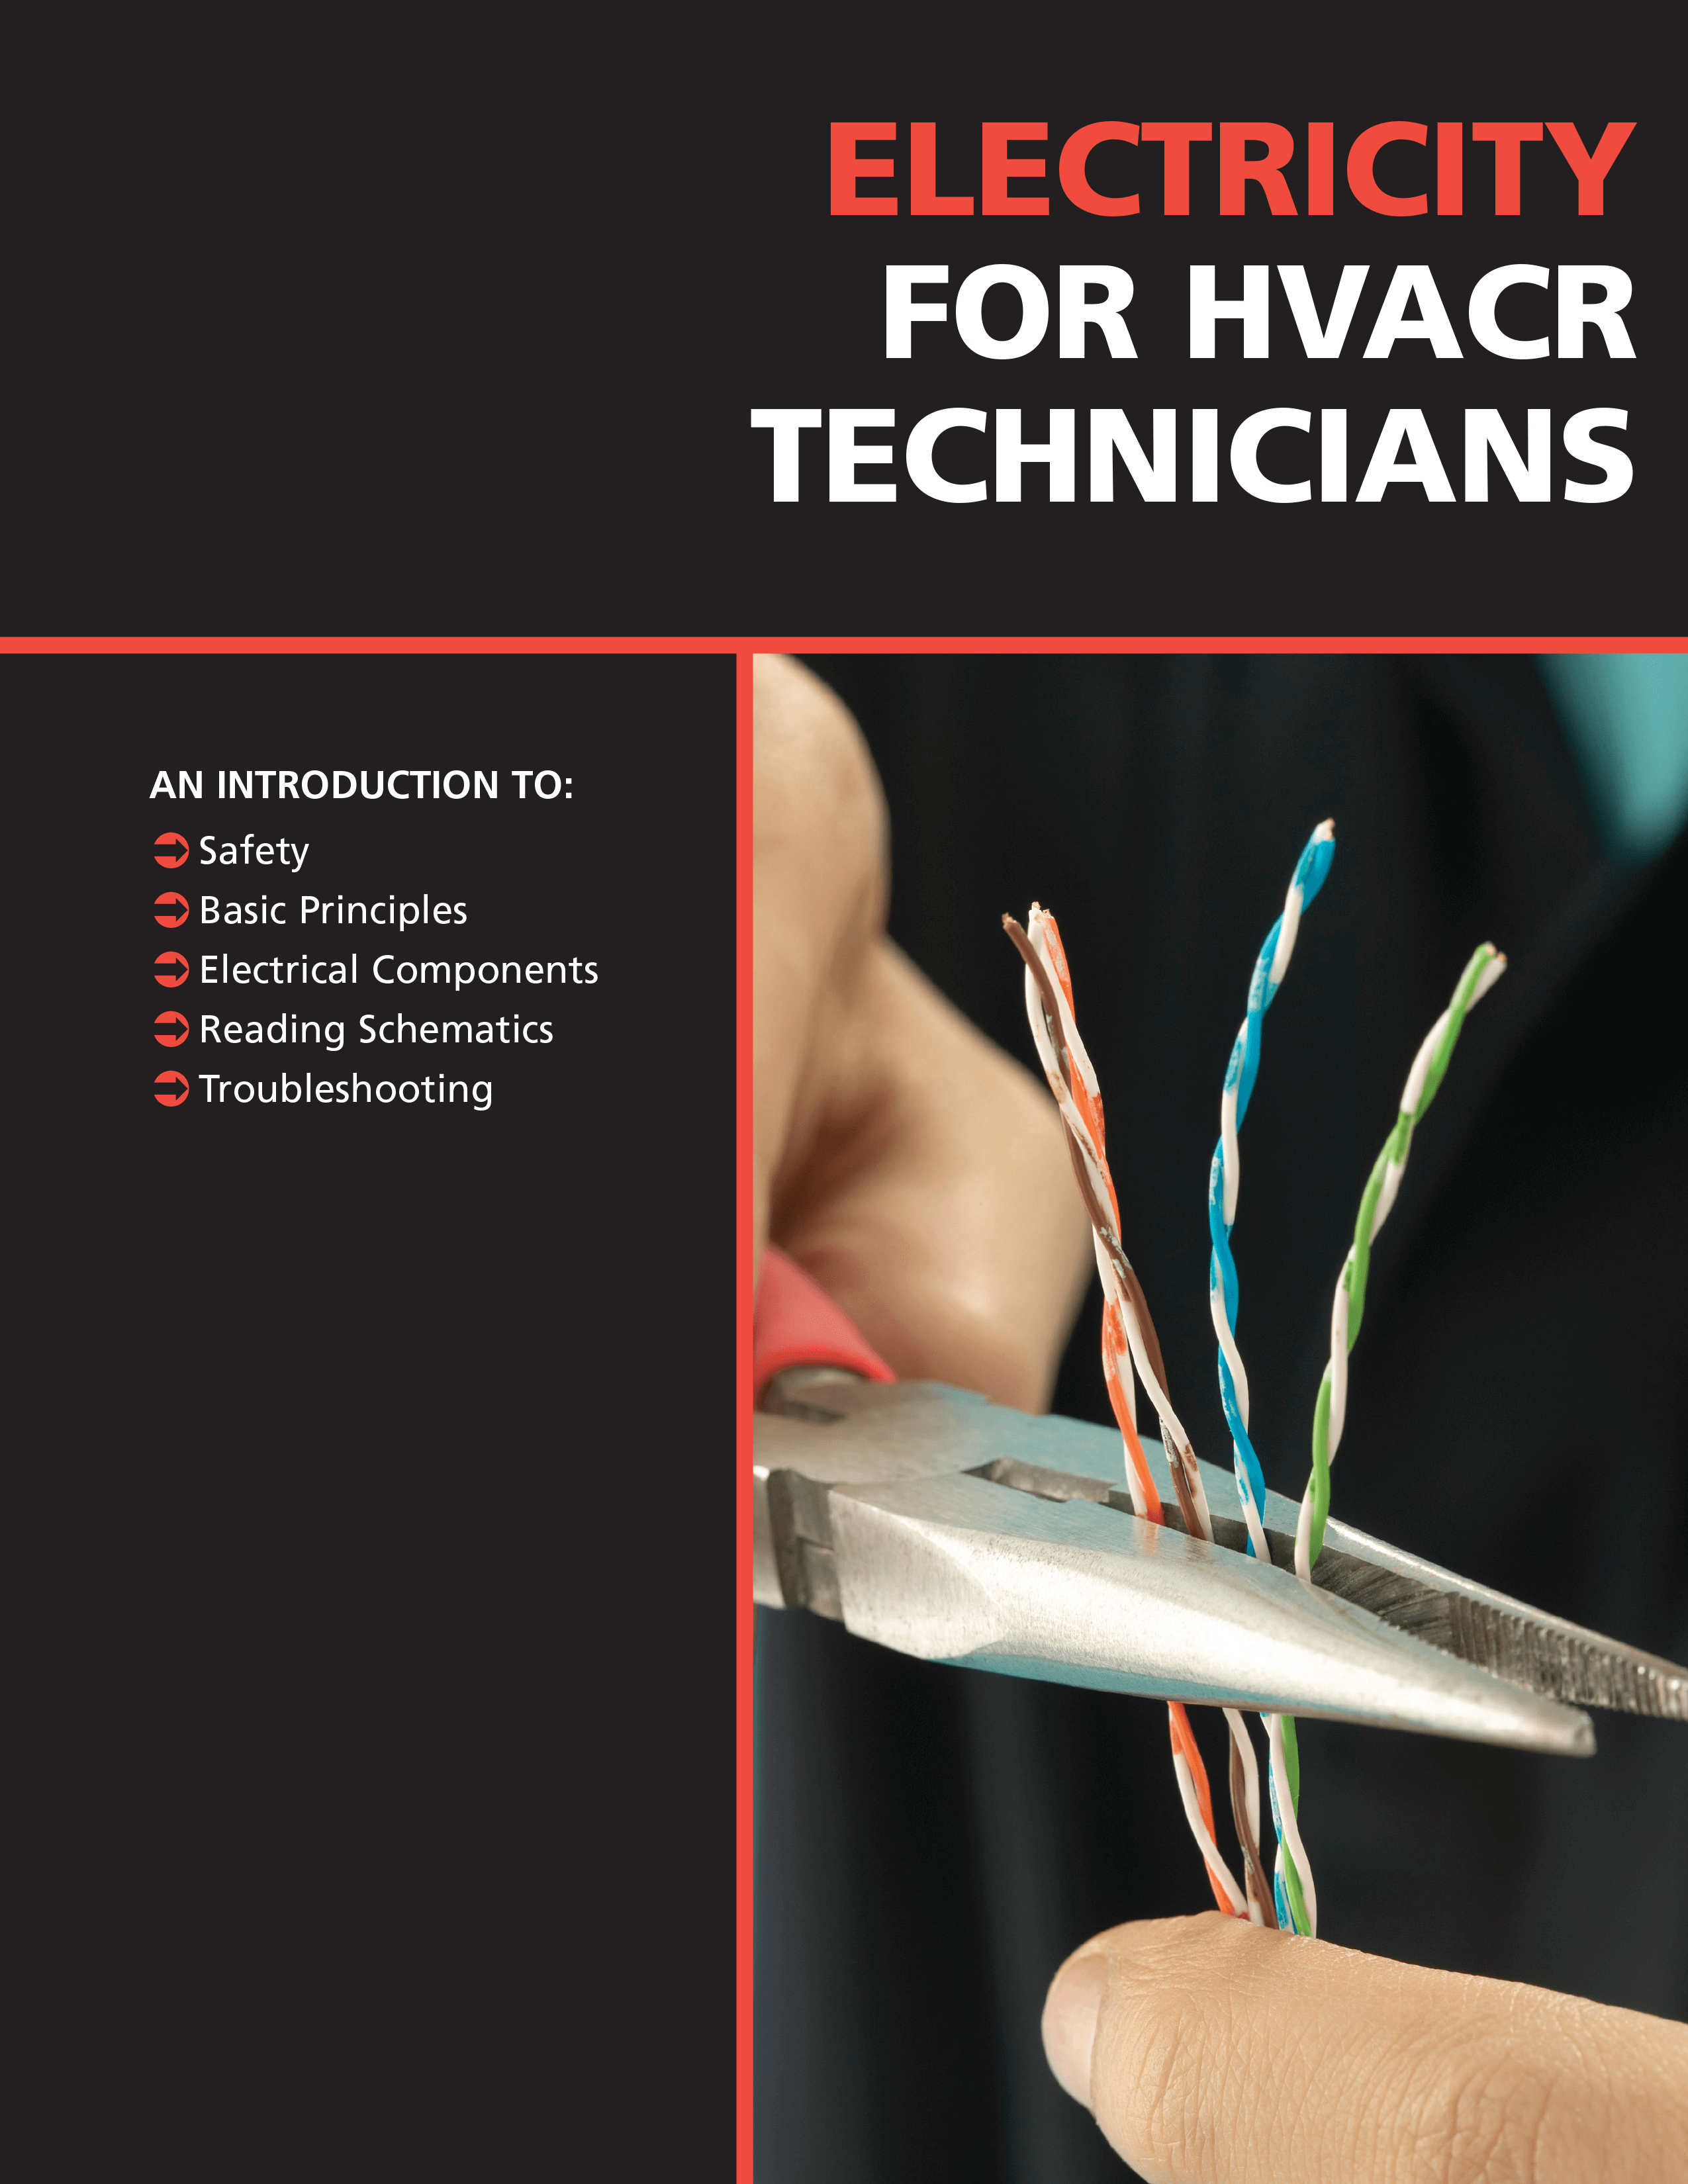 Electricity For HVACR Technicians